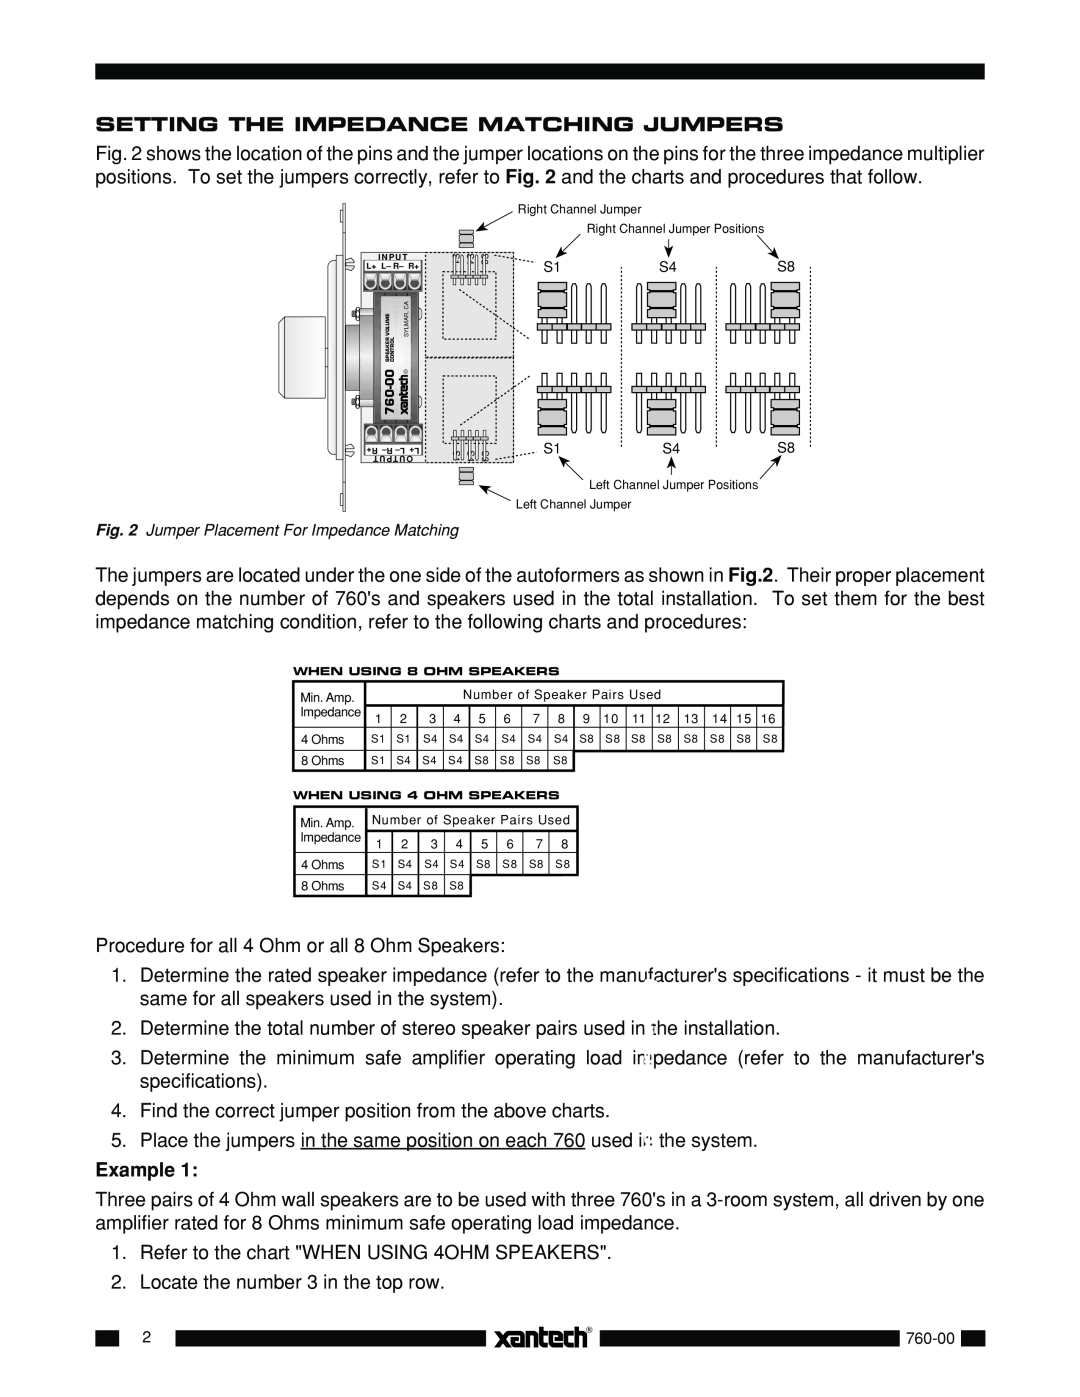 Xantech 760-00 installation instructions Setting The Impedance Matching Jumpers 